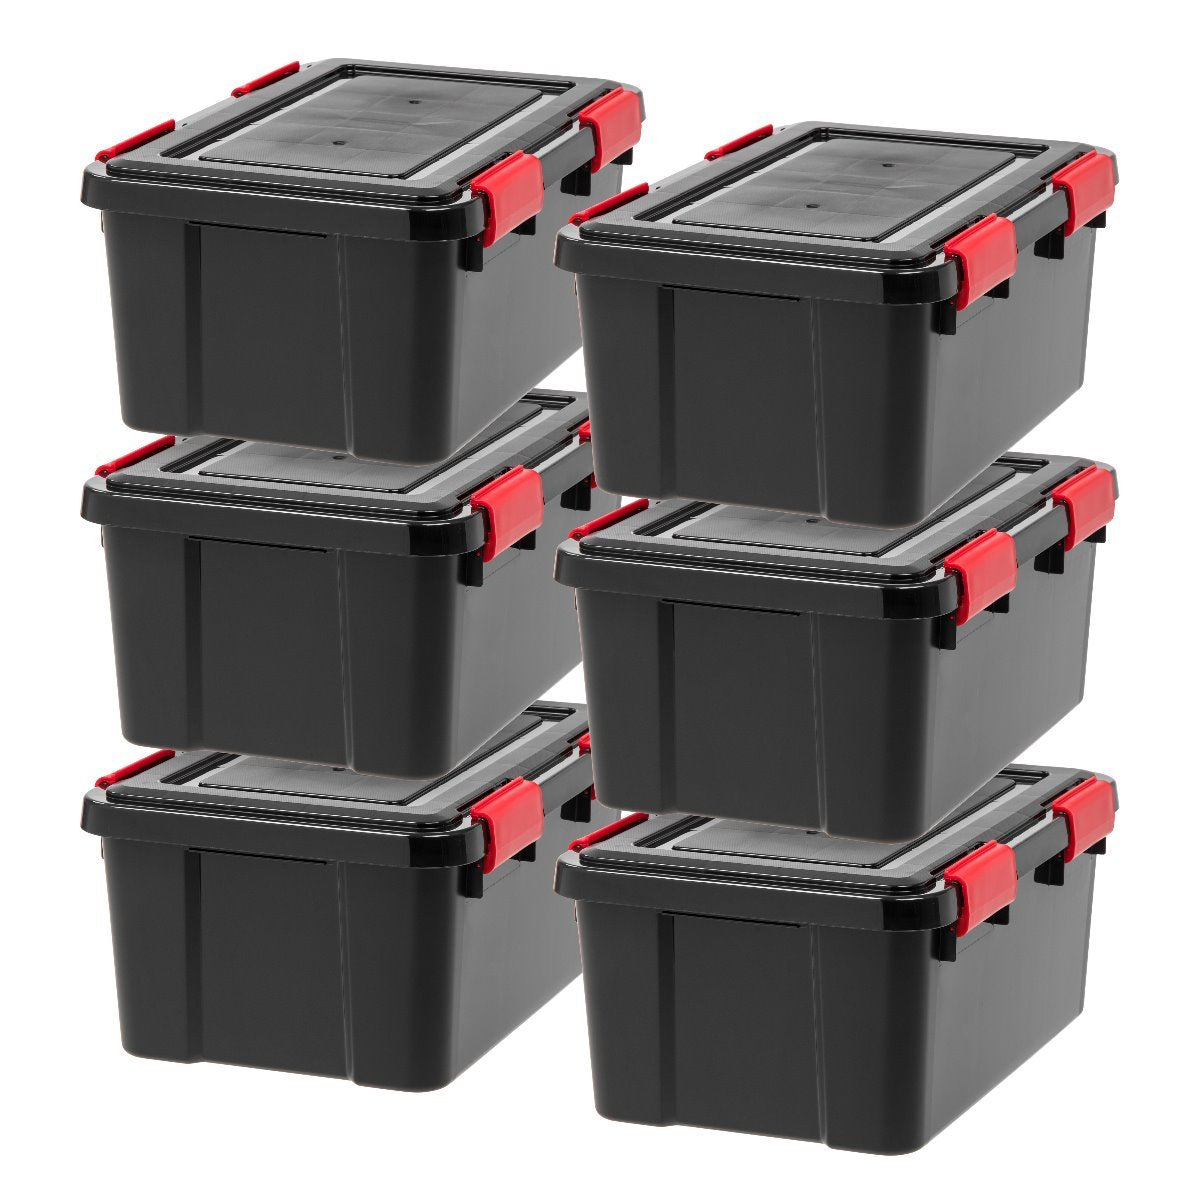 Sterilite 50 Gallon Plastic Stacker Tote, Heavy Duty Lidded Storage Bin  Container for Stackable Garage and Basement Organization, Black, 9-Pack